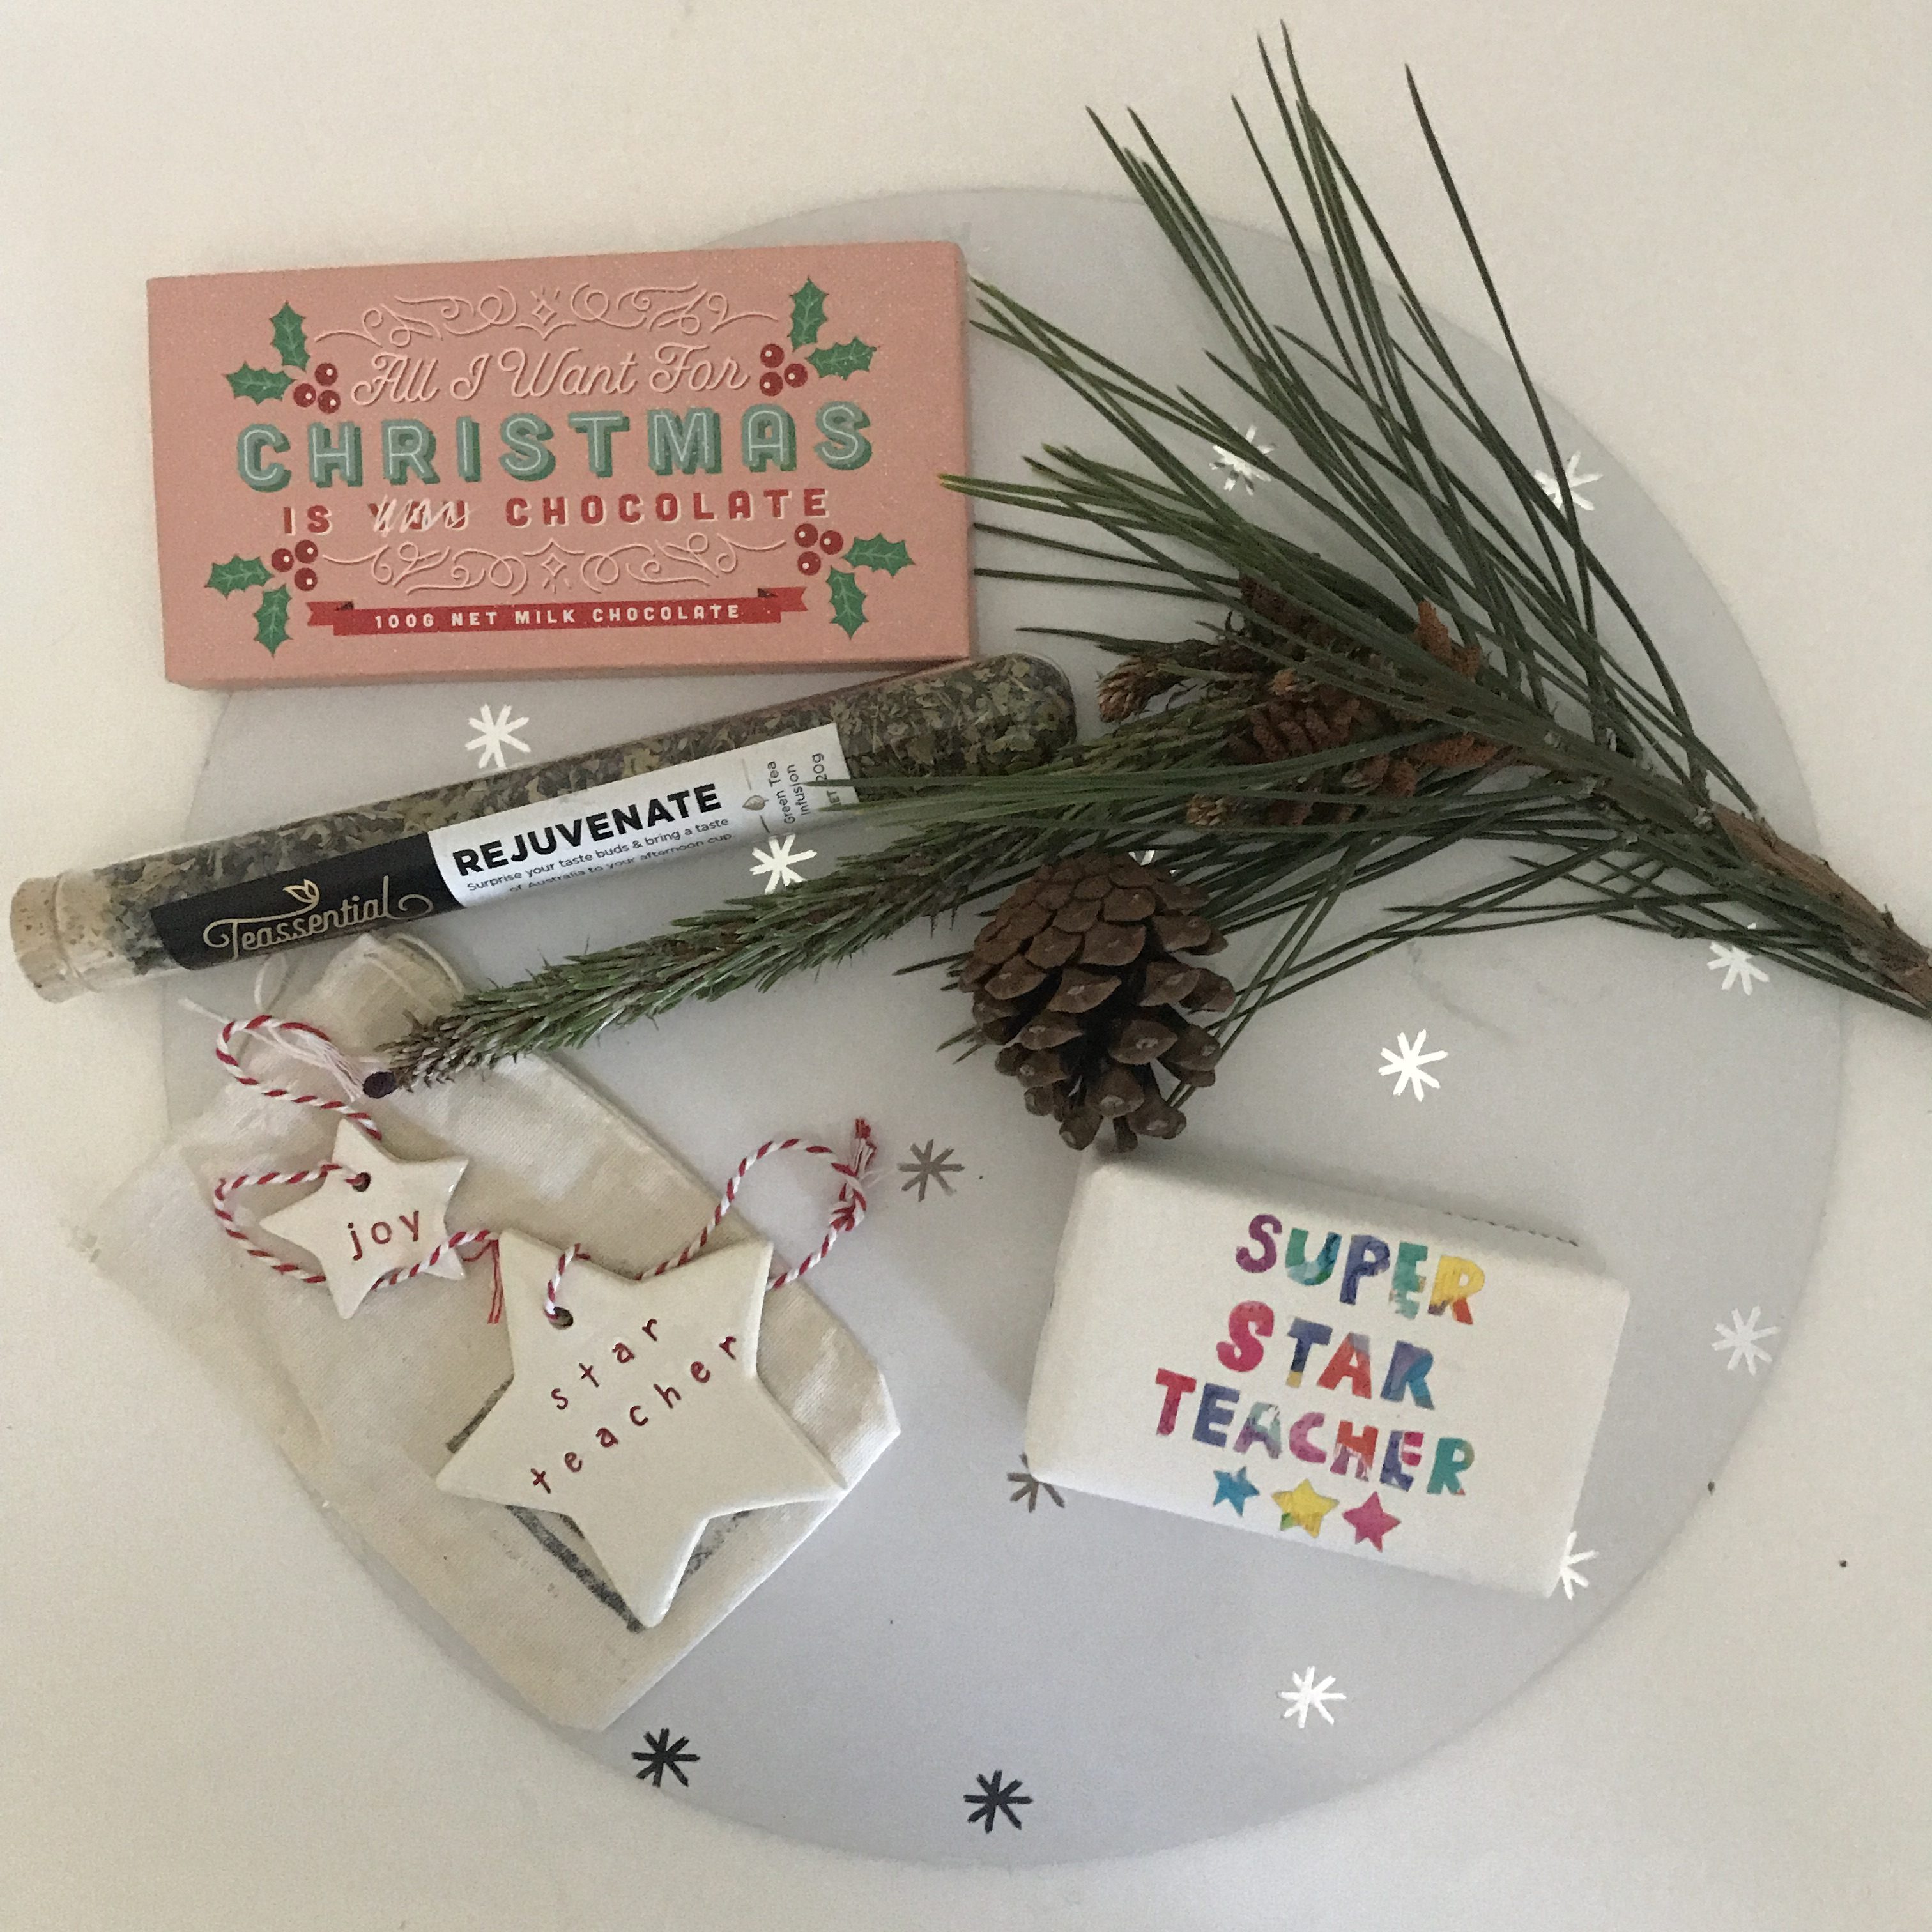 All I want for Christmas | Rejuvenate Teacher Christmas Gift Pot | Gift Solutions Corporate Small Business